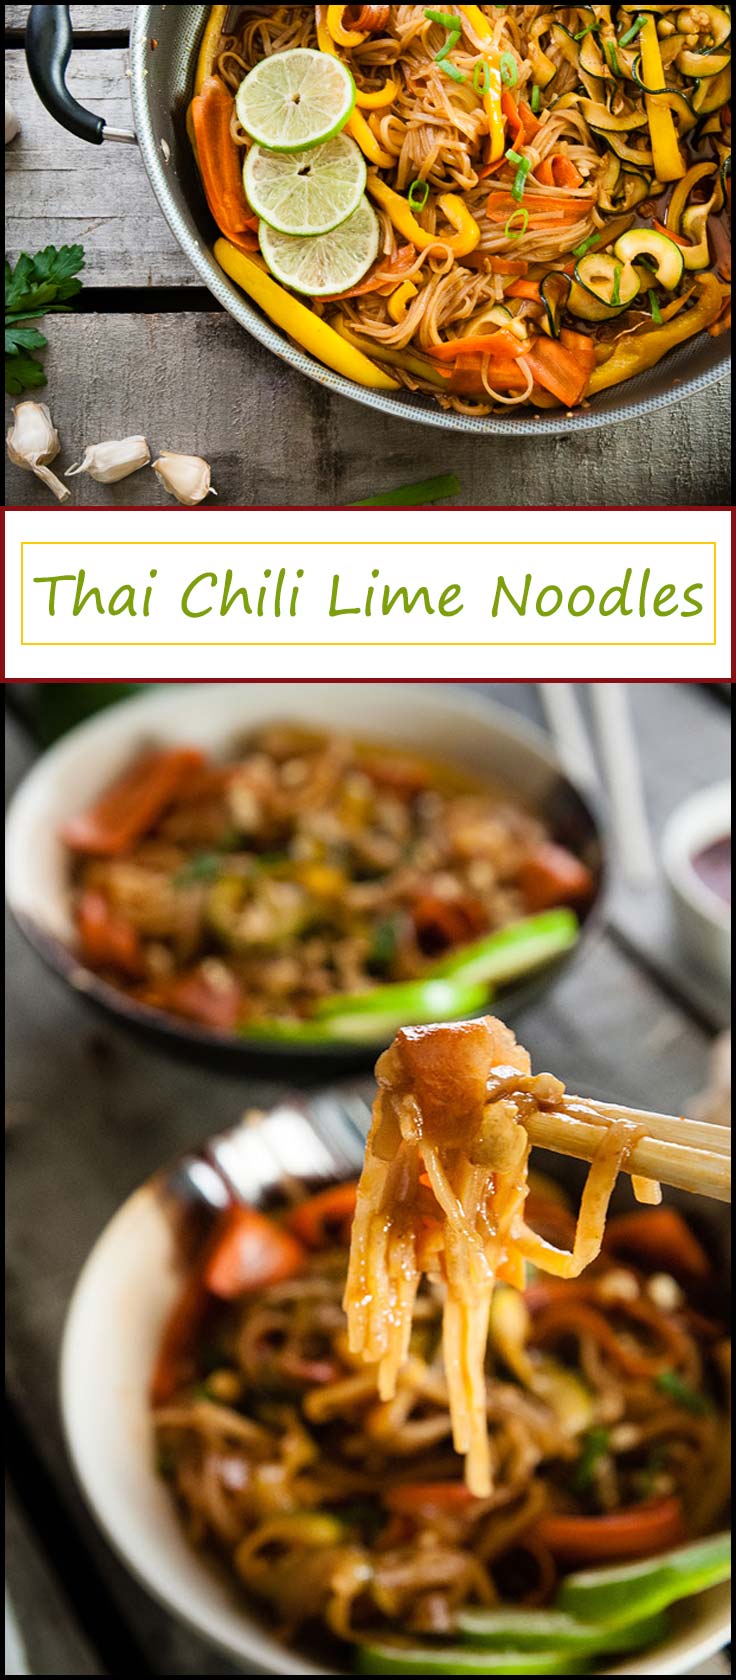 Thai Chili Lime Noodles are ready in 20 minutes and make a versatile vegetarian dinner or lunch that can be made vegan with one small change from www.seasonedsprinkles.com